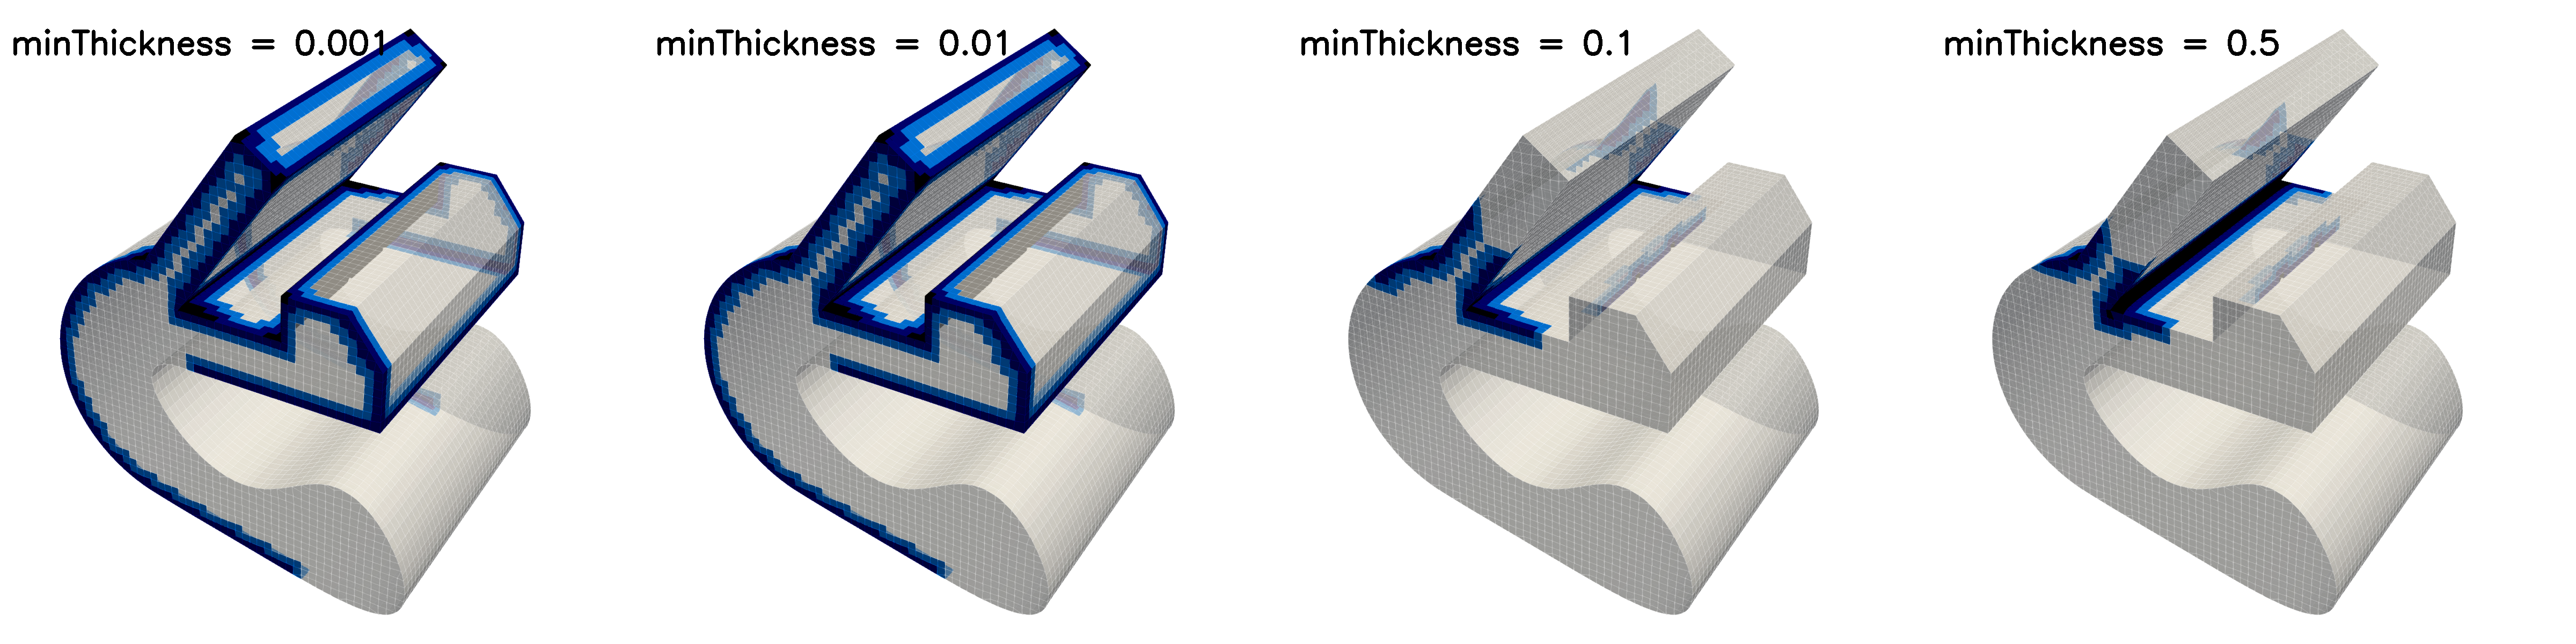 minThicknessSurface